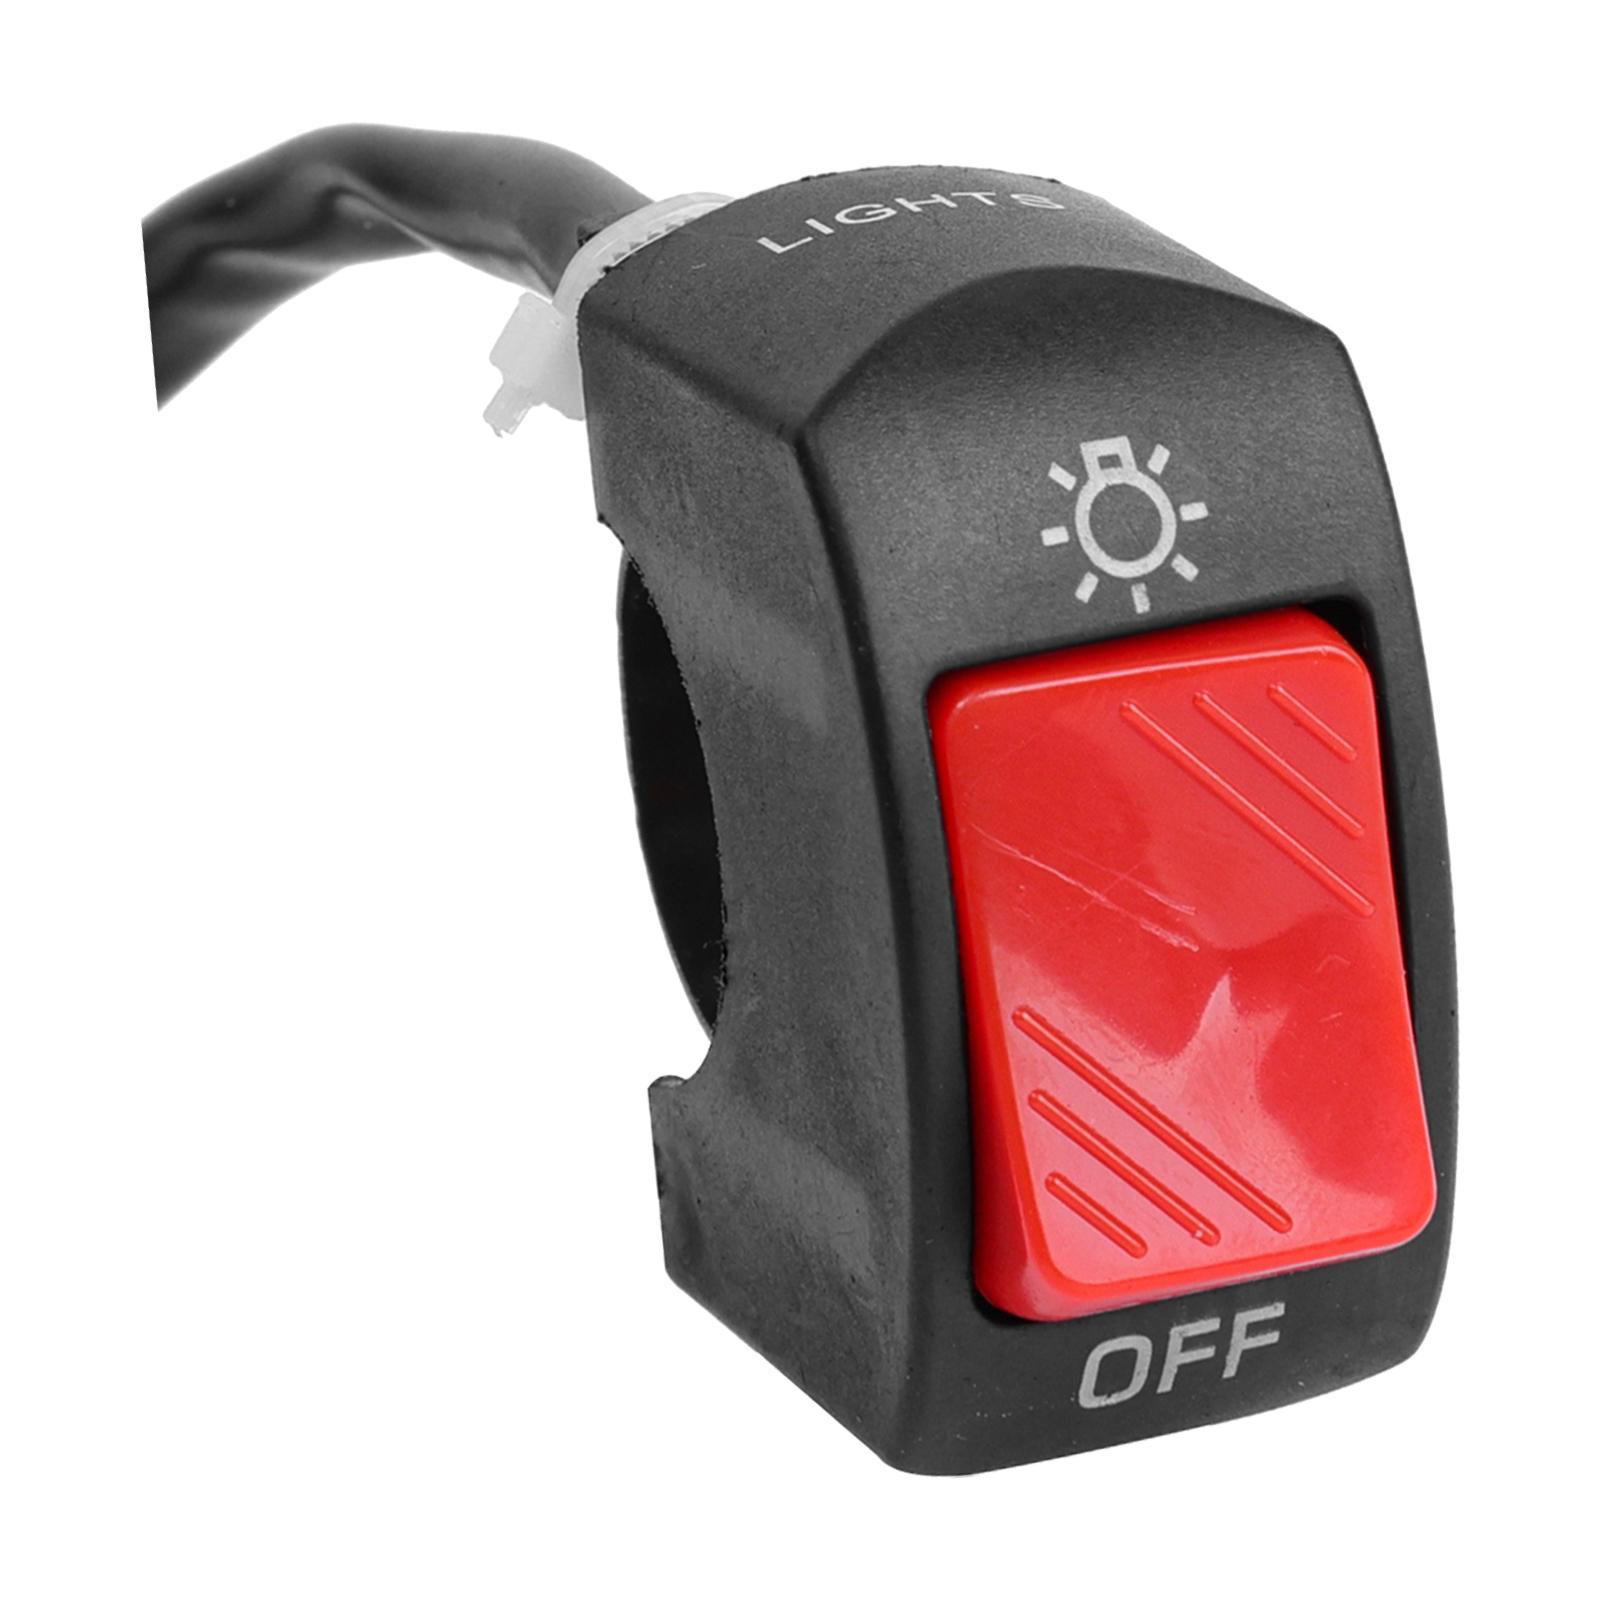 Motorcycle Headlight Control Switch Button Easy Installation Replaces on Off Switch